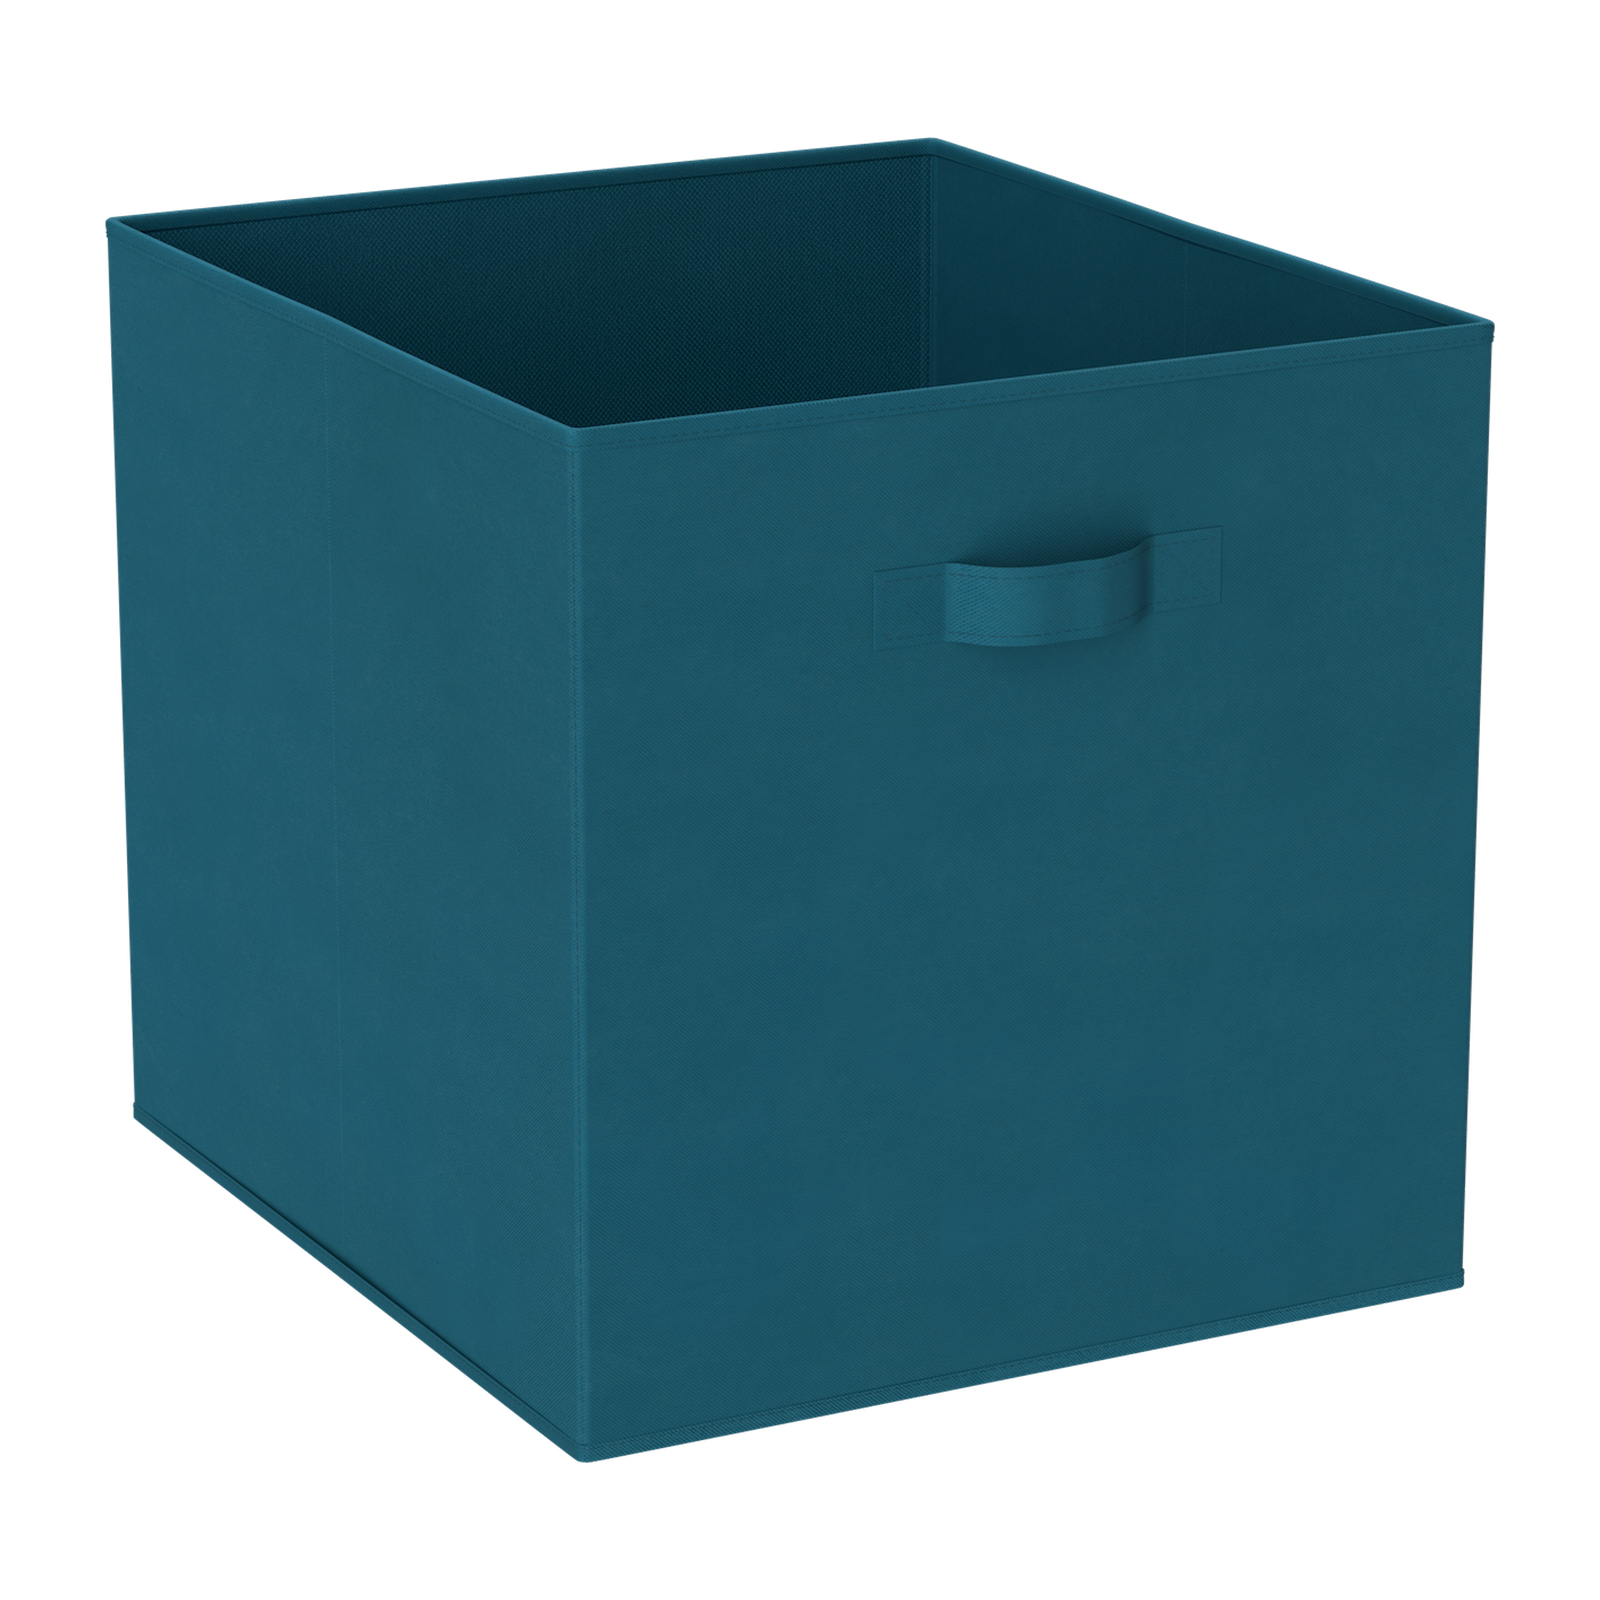 Clever Cube Fabric Insert Lyons Blue